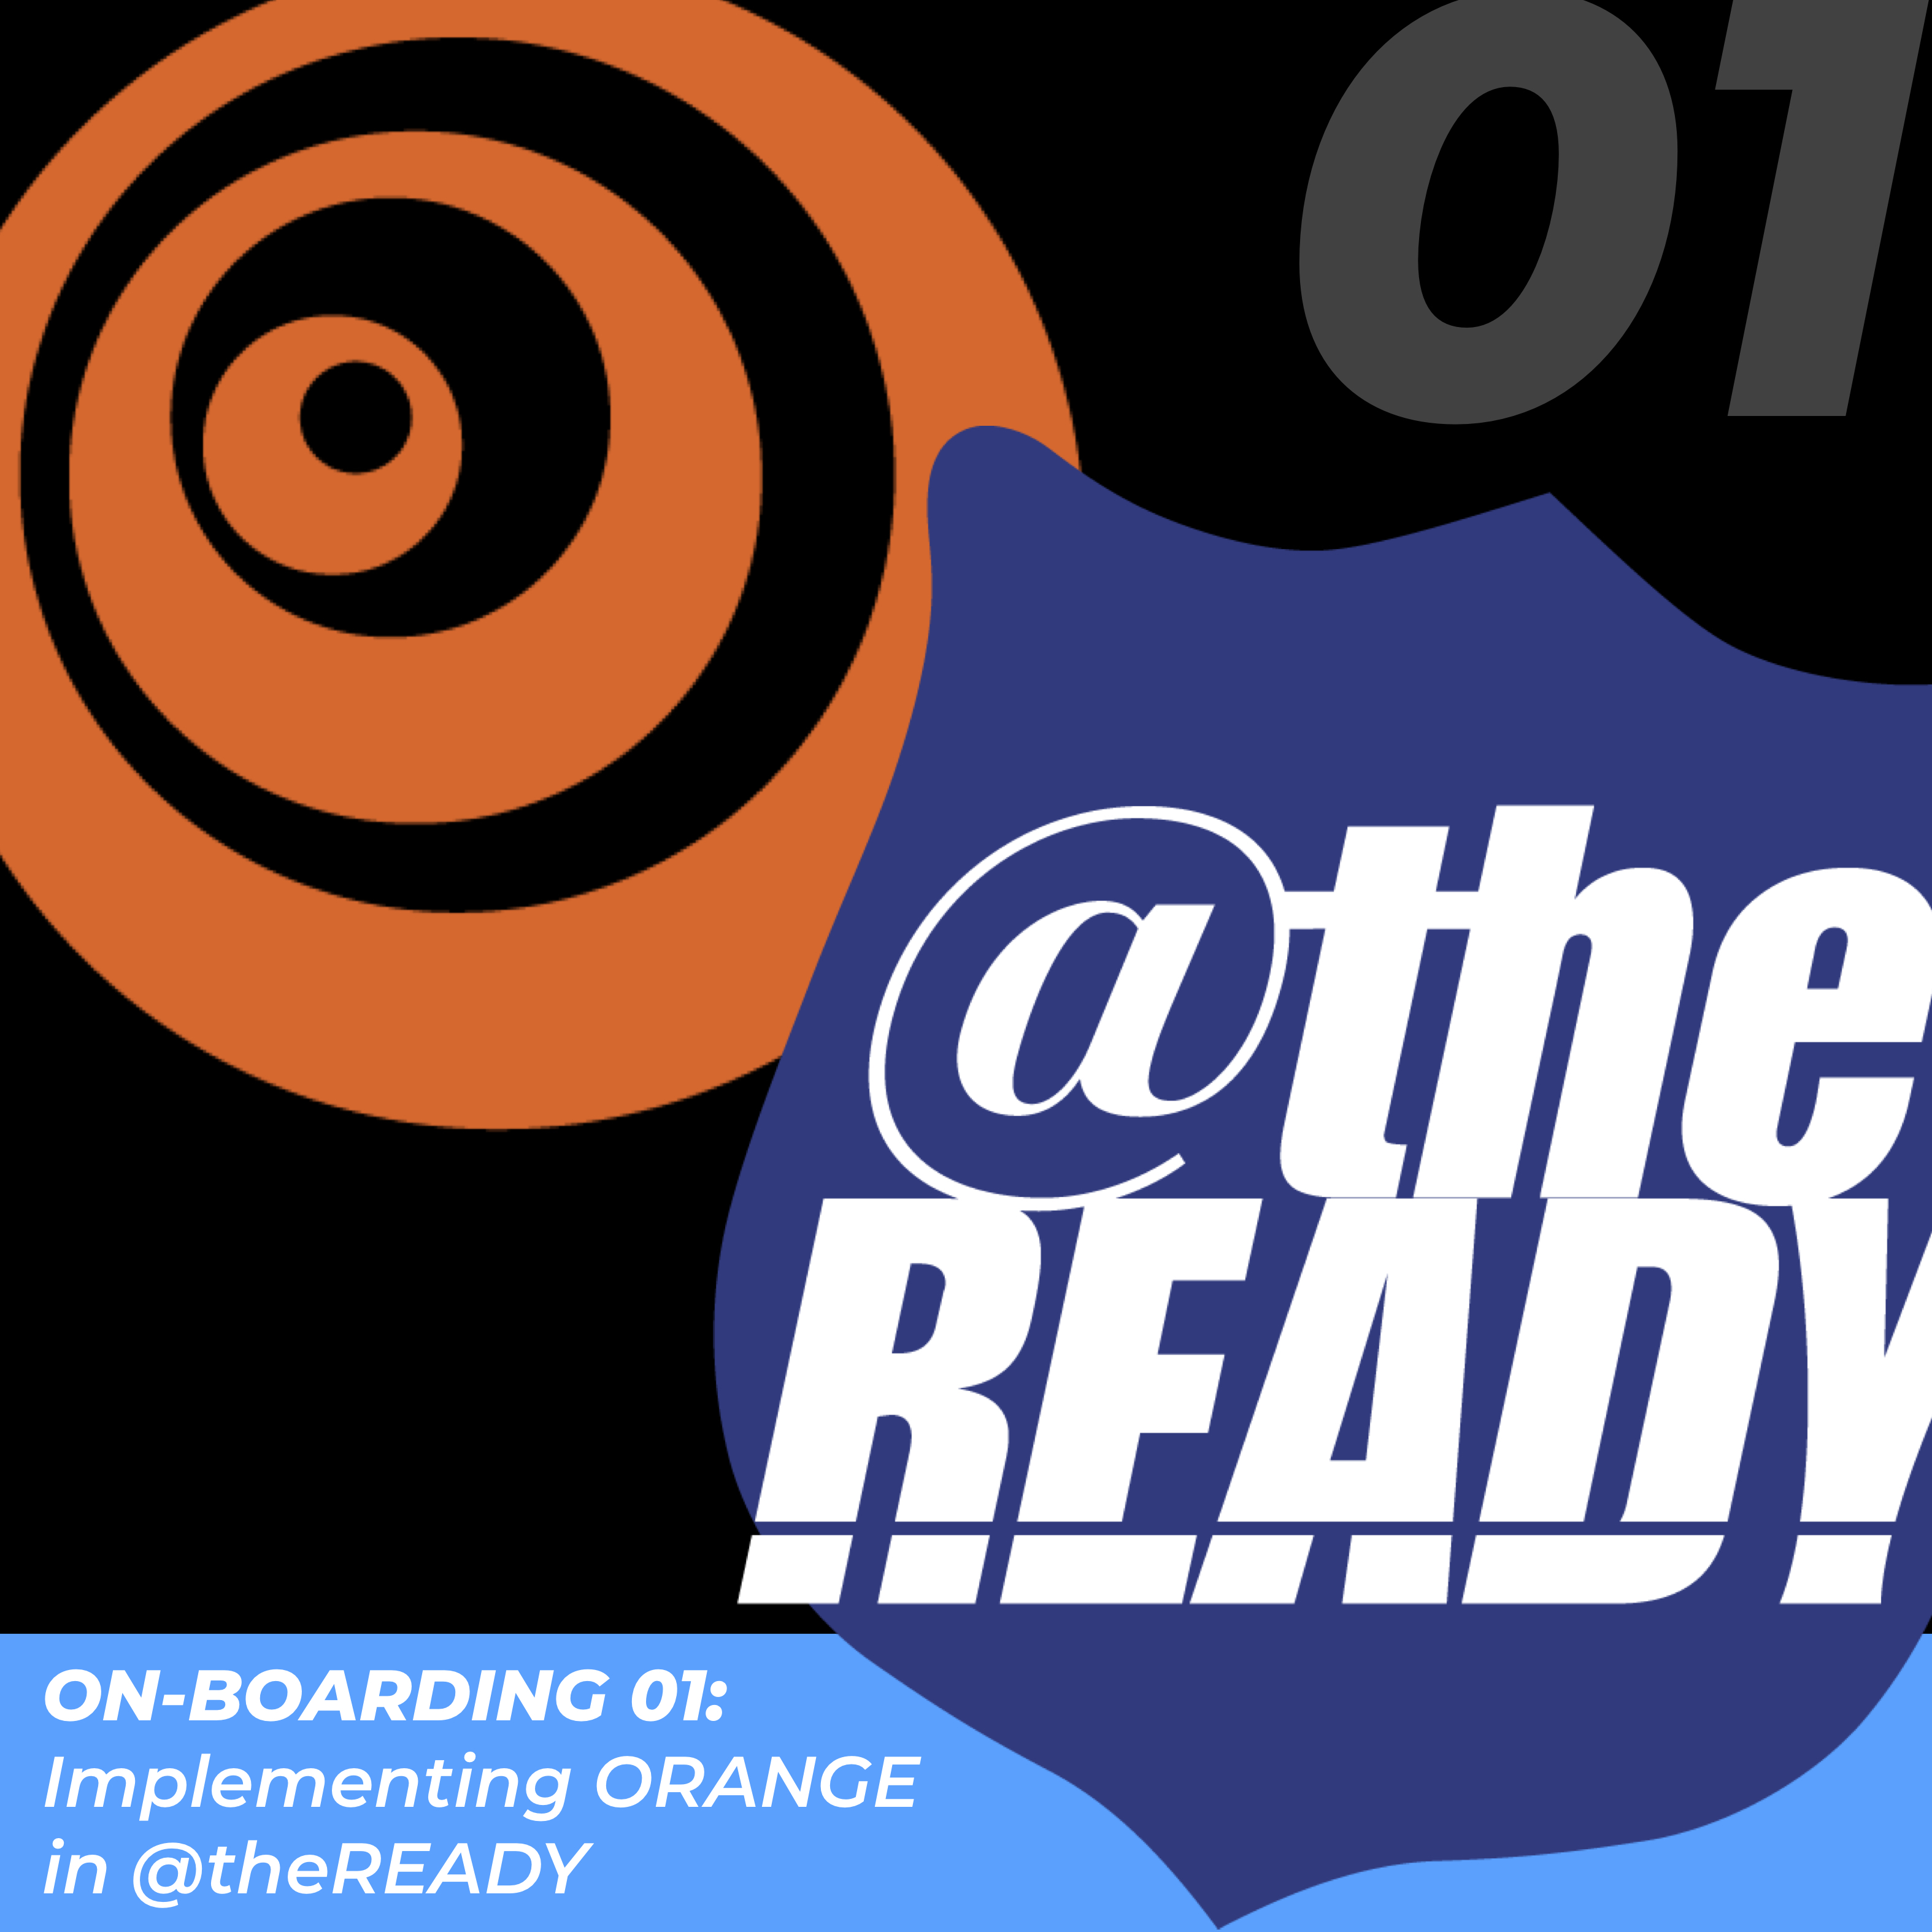 Click here for On-boarding 01: Implementing Orange in @theReady.